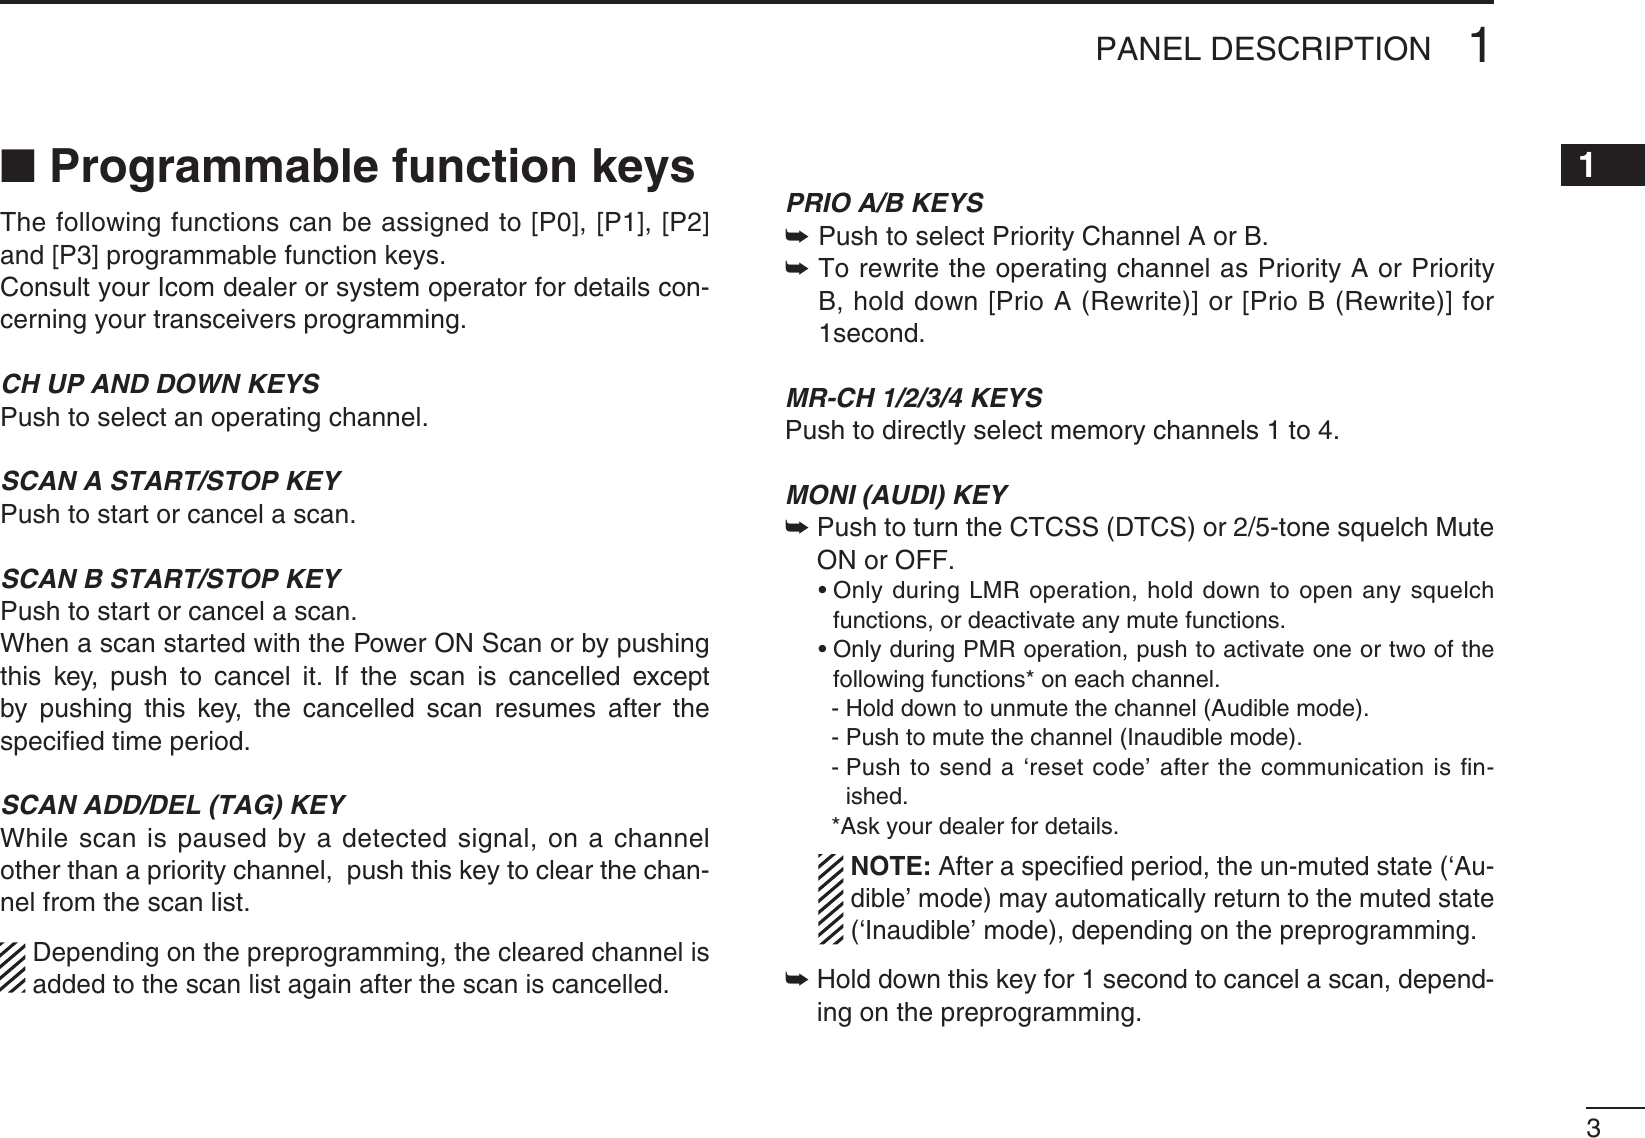 31PANEL DESCRIPTION12345678910111213141516N Programmable function keysThe following functions can be assigned to [P0], [P1], [P2] and [P3] programmable function keys.Consult your Icom dealer or system operator for details con-cerning your transceivers programming.CH UP AND DOWN KEYS Push to select an operating channel.SCAN A START/STOP KEYPush to start or cancel a scan.SCAN B START/STOP KEYPush to start or cancel a scan.When a scan started with the Power ON Scan or by pushing THIS KEY PUSH TO CANCEL IT )F THE SCAN IS CANCELLED EXCEPTby pushing this key, the cancelled scan resumes after the speciﬁed time period.SCAN ADD/DEL (TAG) KEYWhile scan is paused by a detected signal, on a channel other than a priority channel,  push this key to clear the chan-nel from the scan list.  Depending on the preprogramming, the cleared channel is added to the scan list again after the scan is cancelled.PRIO A/B KEYS± Push to select Priority Channel A or B.±  To rewrite the operating channel as Priority A or Priority B, hold down [Prio A (Rewrite)] or [Prio B (Rewrite)] for 1second.MR-CH 1/2/3/4 KEYSPush to directly select memory channels 1 to 4.MONI (AUDI) KEY±0USHTOTURNTHE#4#33$4#3ORTONESQUELCH-UTEON or OFF. s/NLYDURING,-2OPERATIONHOLDDOWNTOOPENANYSQUELCHfunctions, or deactivate any mute functions. s/NLYDURING0-2OPERATIONPUSHTOACTIVATEONEORTWOOFTHEfollowing functions* on each channel.    - Hold down to unmute the channel (Audible mode).    - Push to mute the channel (Inaudible mode).    -  Push to send a ‘reset code’ after the communication is ﬁn-ished.    *Ask your dealer for details.    ./4% After a speciﬁed period, the un-muted state (‘Au-dible’ mode) may automatically return to the muted state (‘Inaudible’ mode), depending on the preprogramming.±  Hold down this key for 1 second to cancel a scan, depend-ing on the preprogramming.